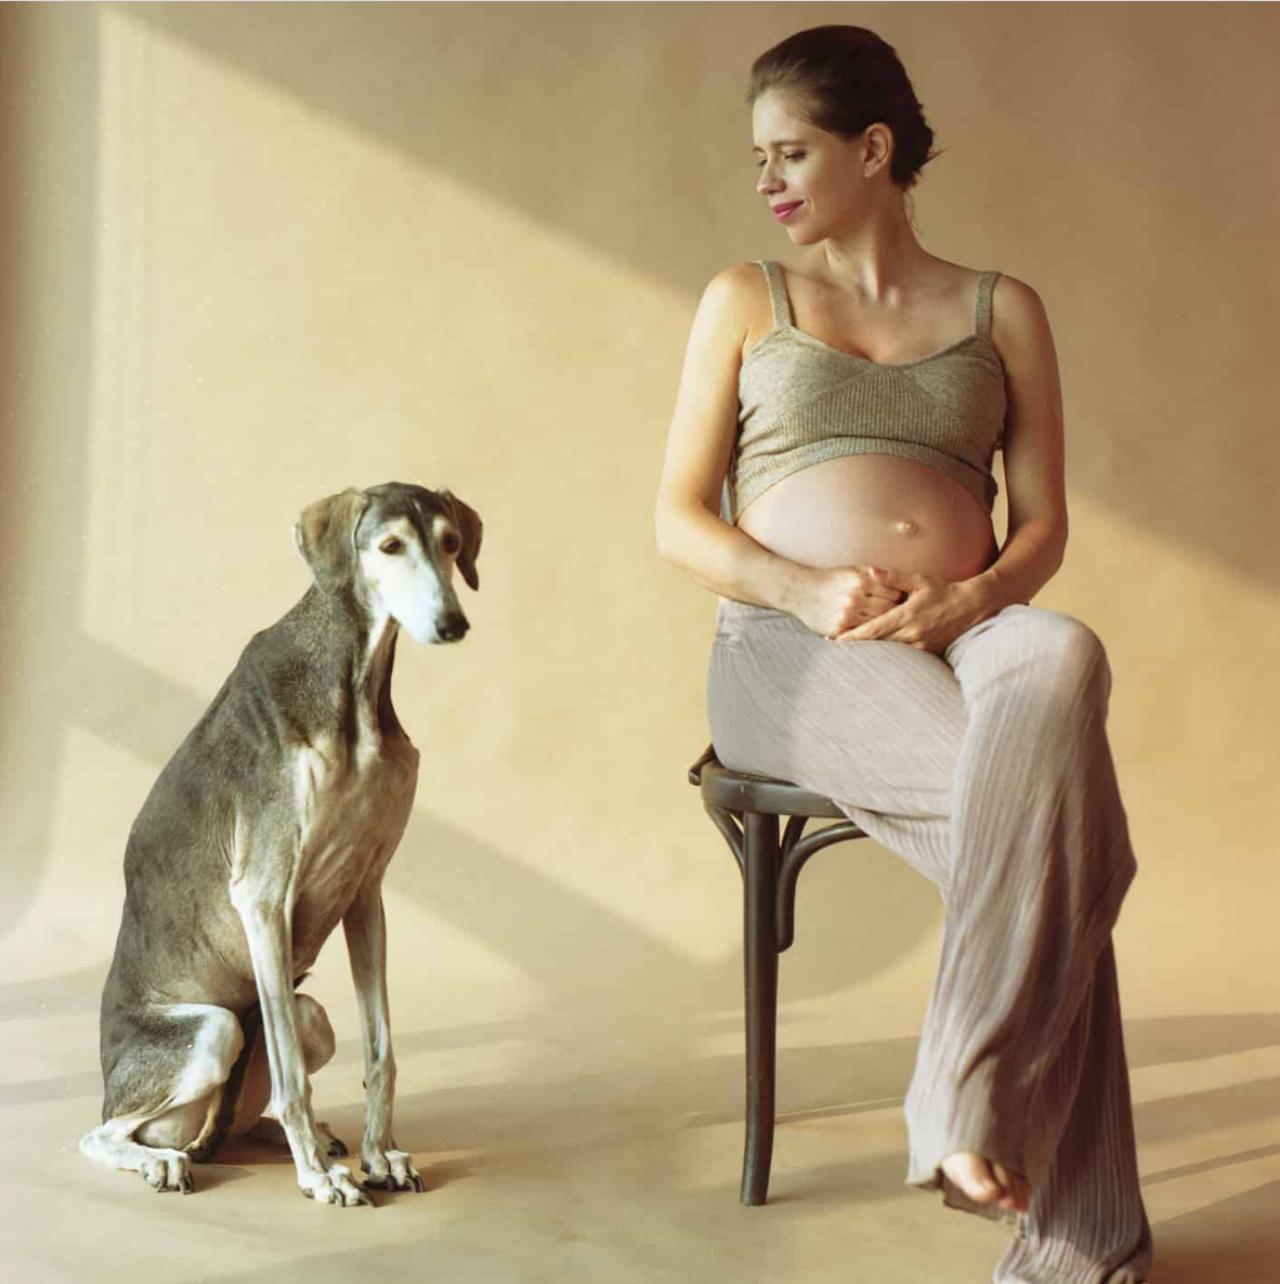 Kalki Koechlin posted a photo featuring her dear pet Kiara, who has become a cherished companion during the actress's pregnancy. In the picture, Kalki sits gracefully on a chair, proudly displaying her baby bump, with Kiara sitting affectionately by her side.